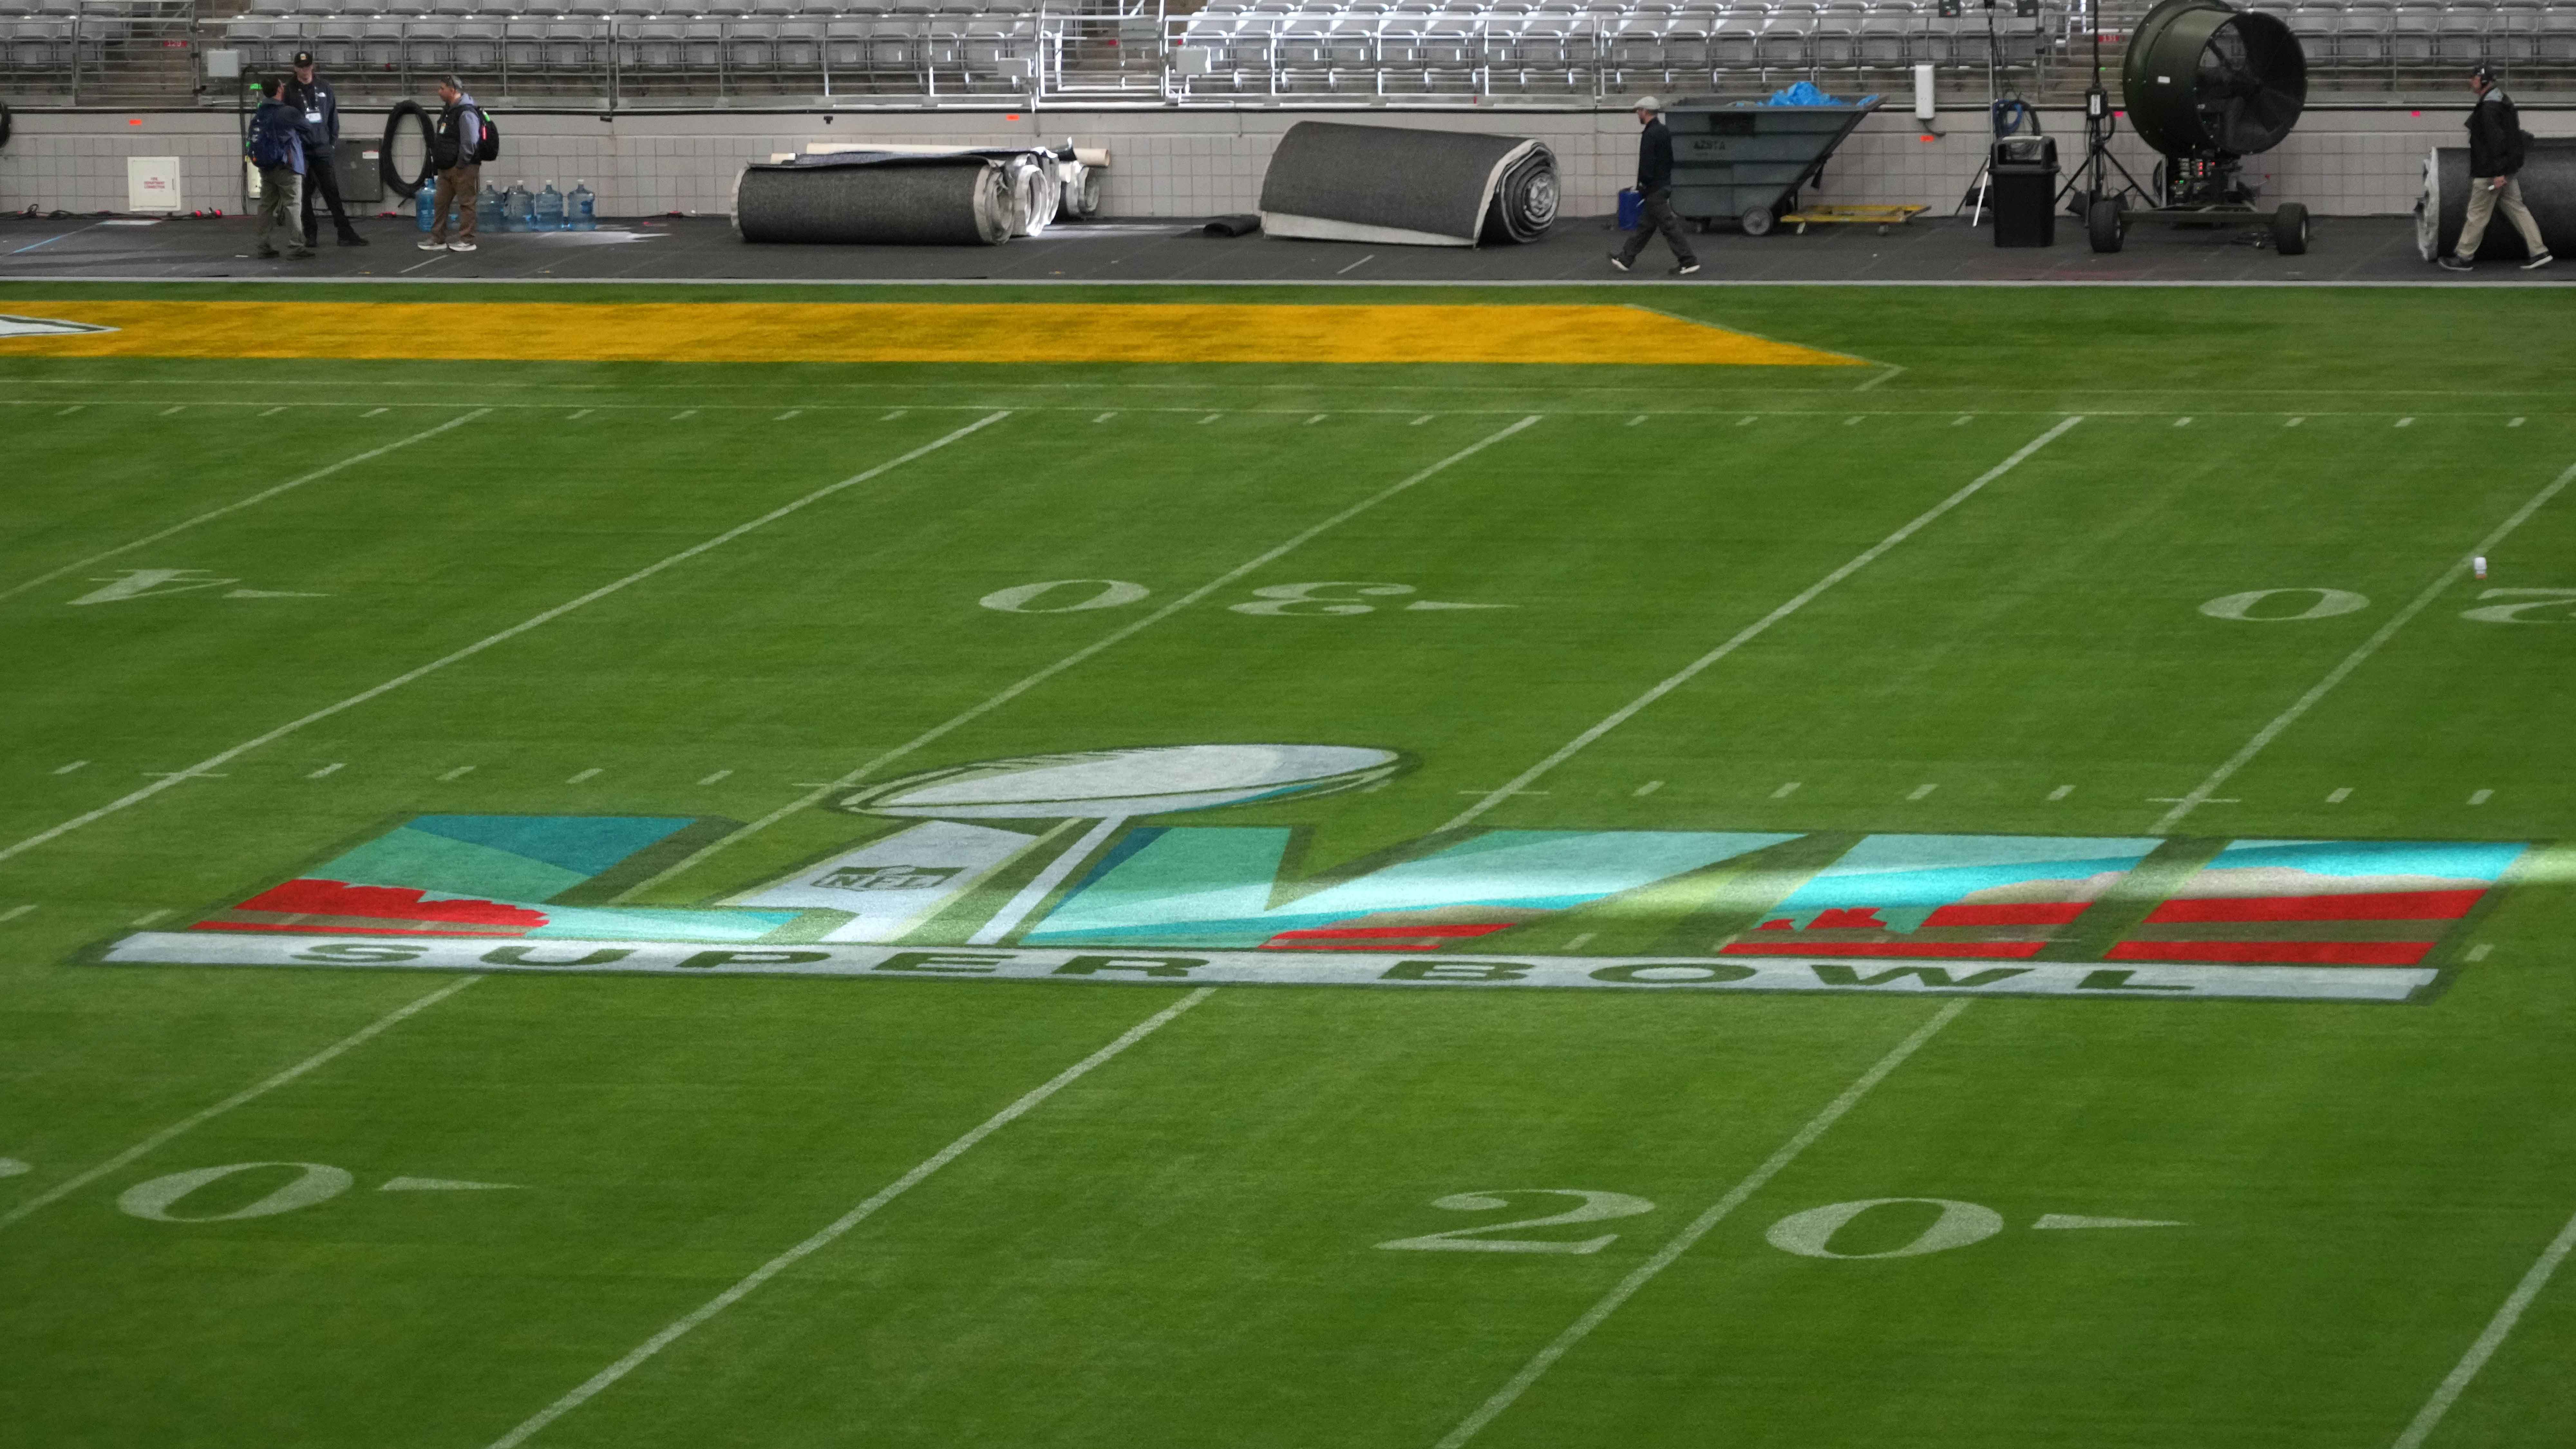 Get an early look at the stadium ahead of Super Bowl LVII